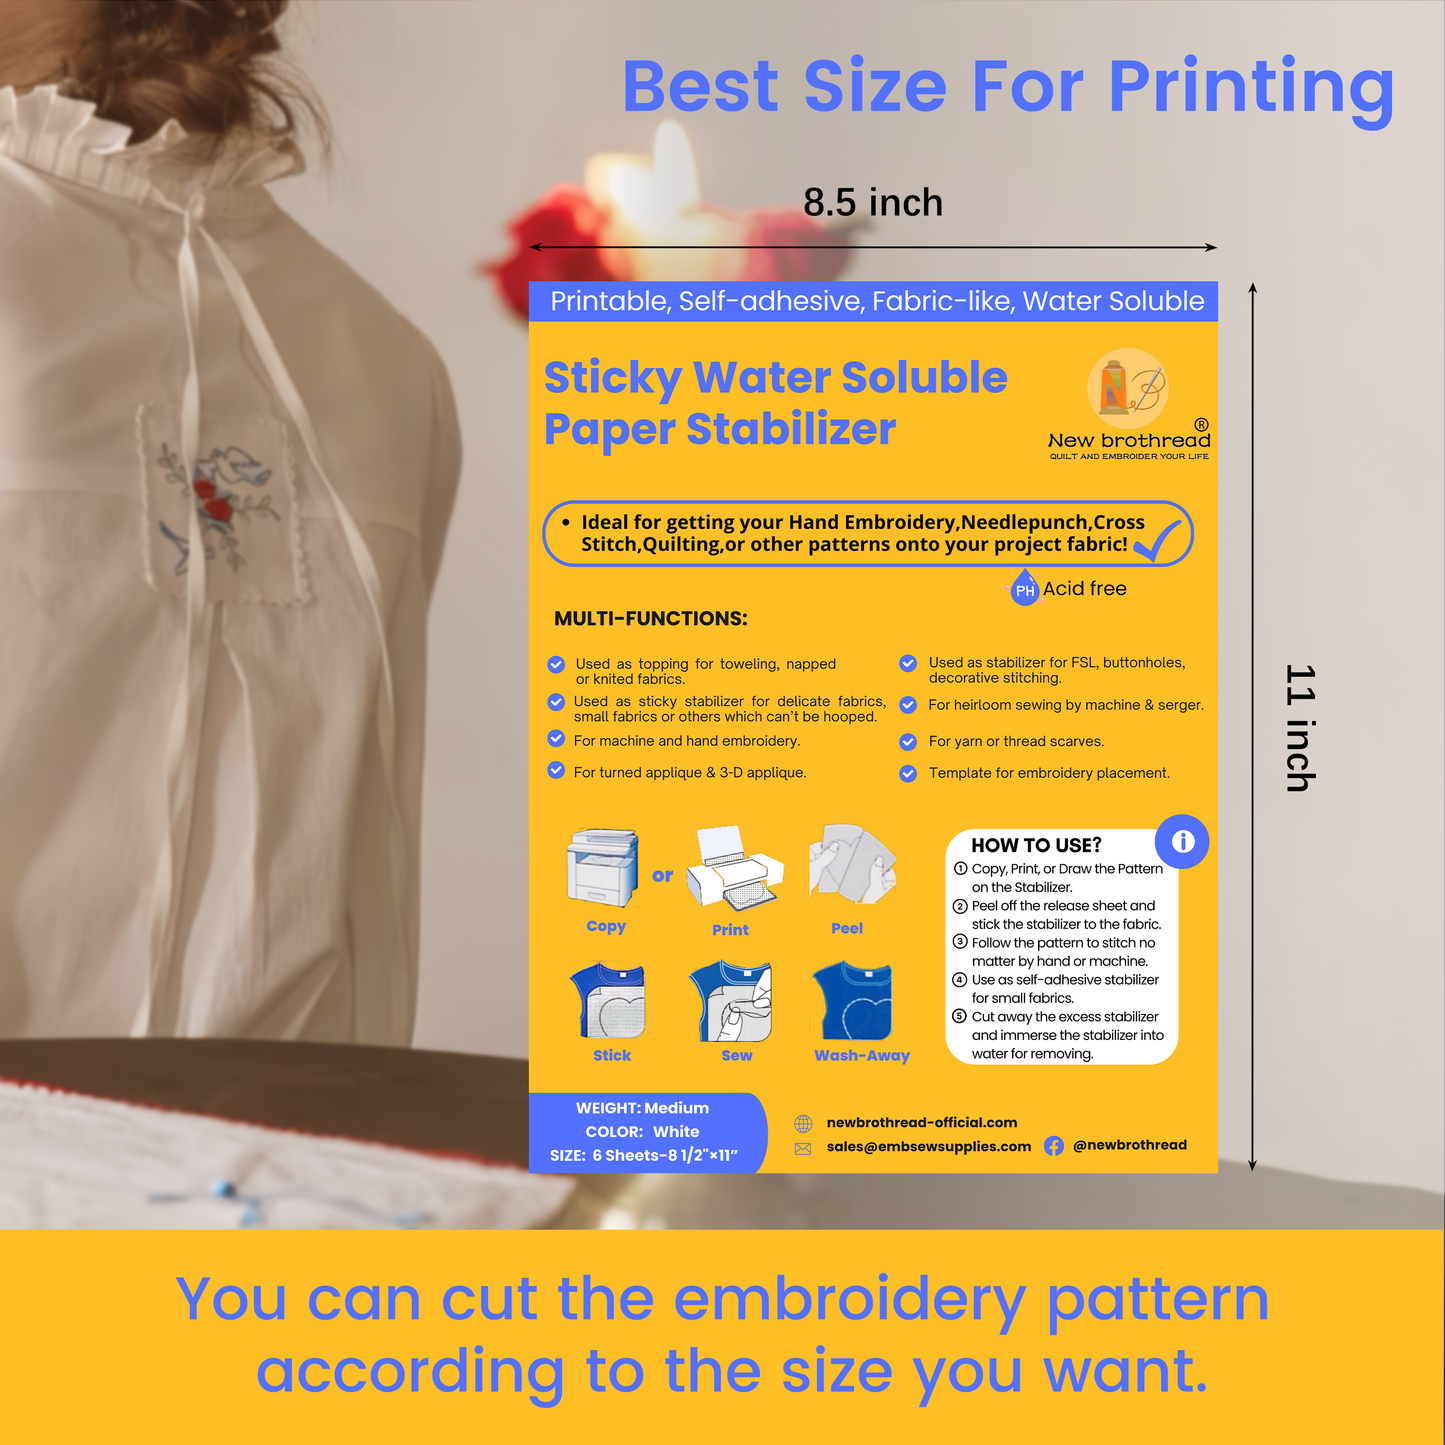 New brothread 6PCS 8.5"x11" Sticky Water Soluble Embroidery Stabilizer Printable Paper Stabilizer - Medium Weight - Allowed for Print or Draw Patterns Best for Hand & Machine Embroidery